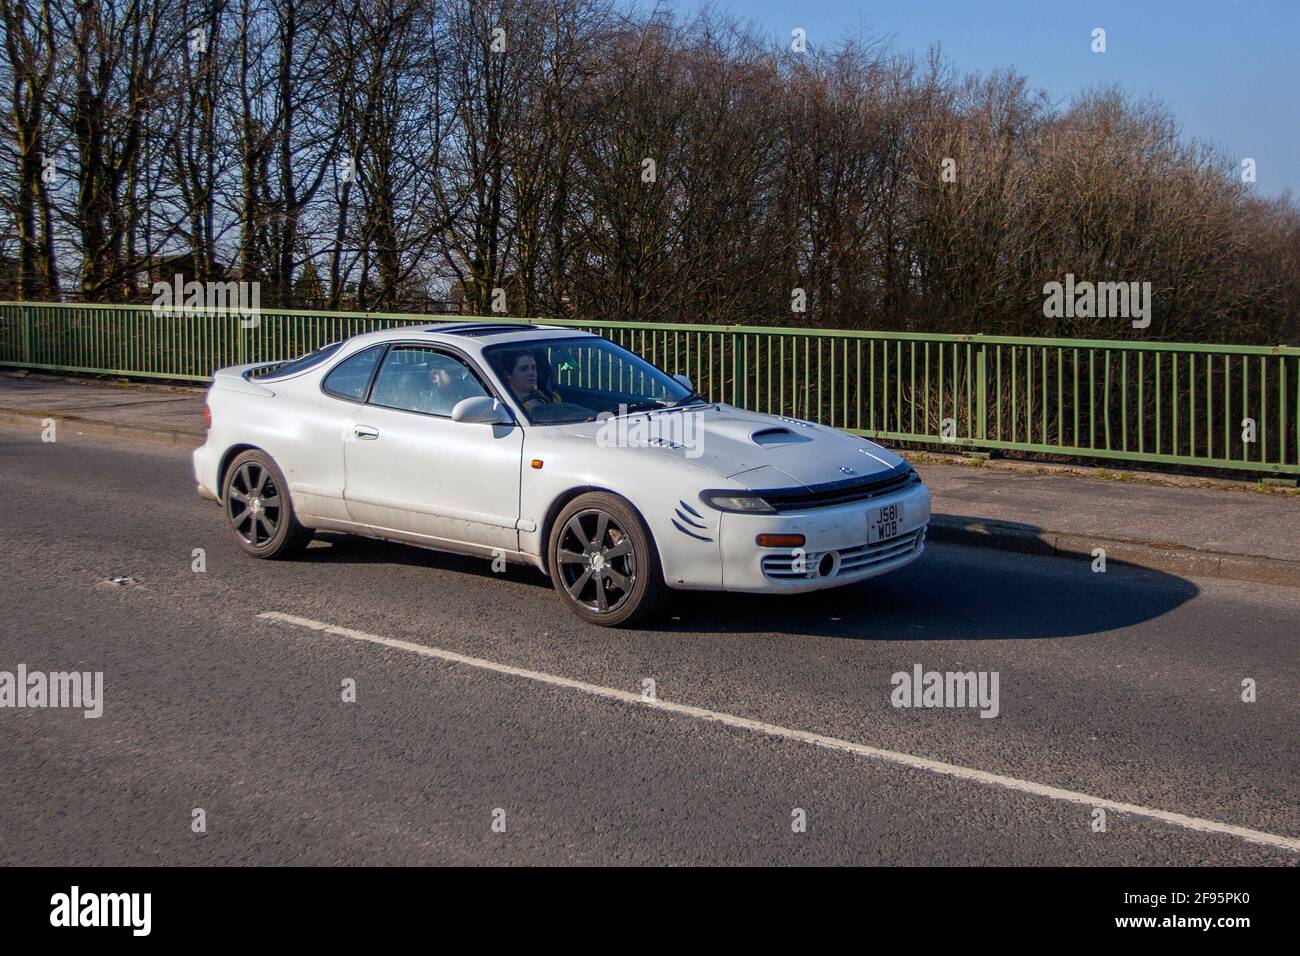 1992 Toyota Celica Gt4; moving vehicles, cars, vehicle driving on UK roads, motors, motoring on the M6 English motorway road network Stock Photo